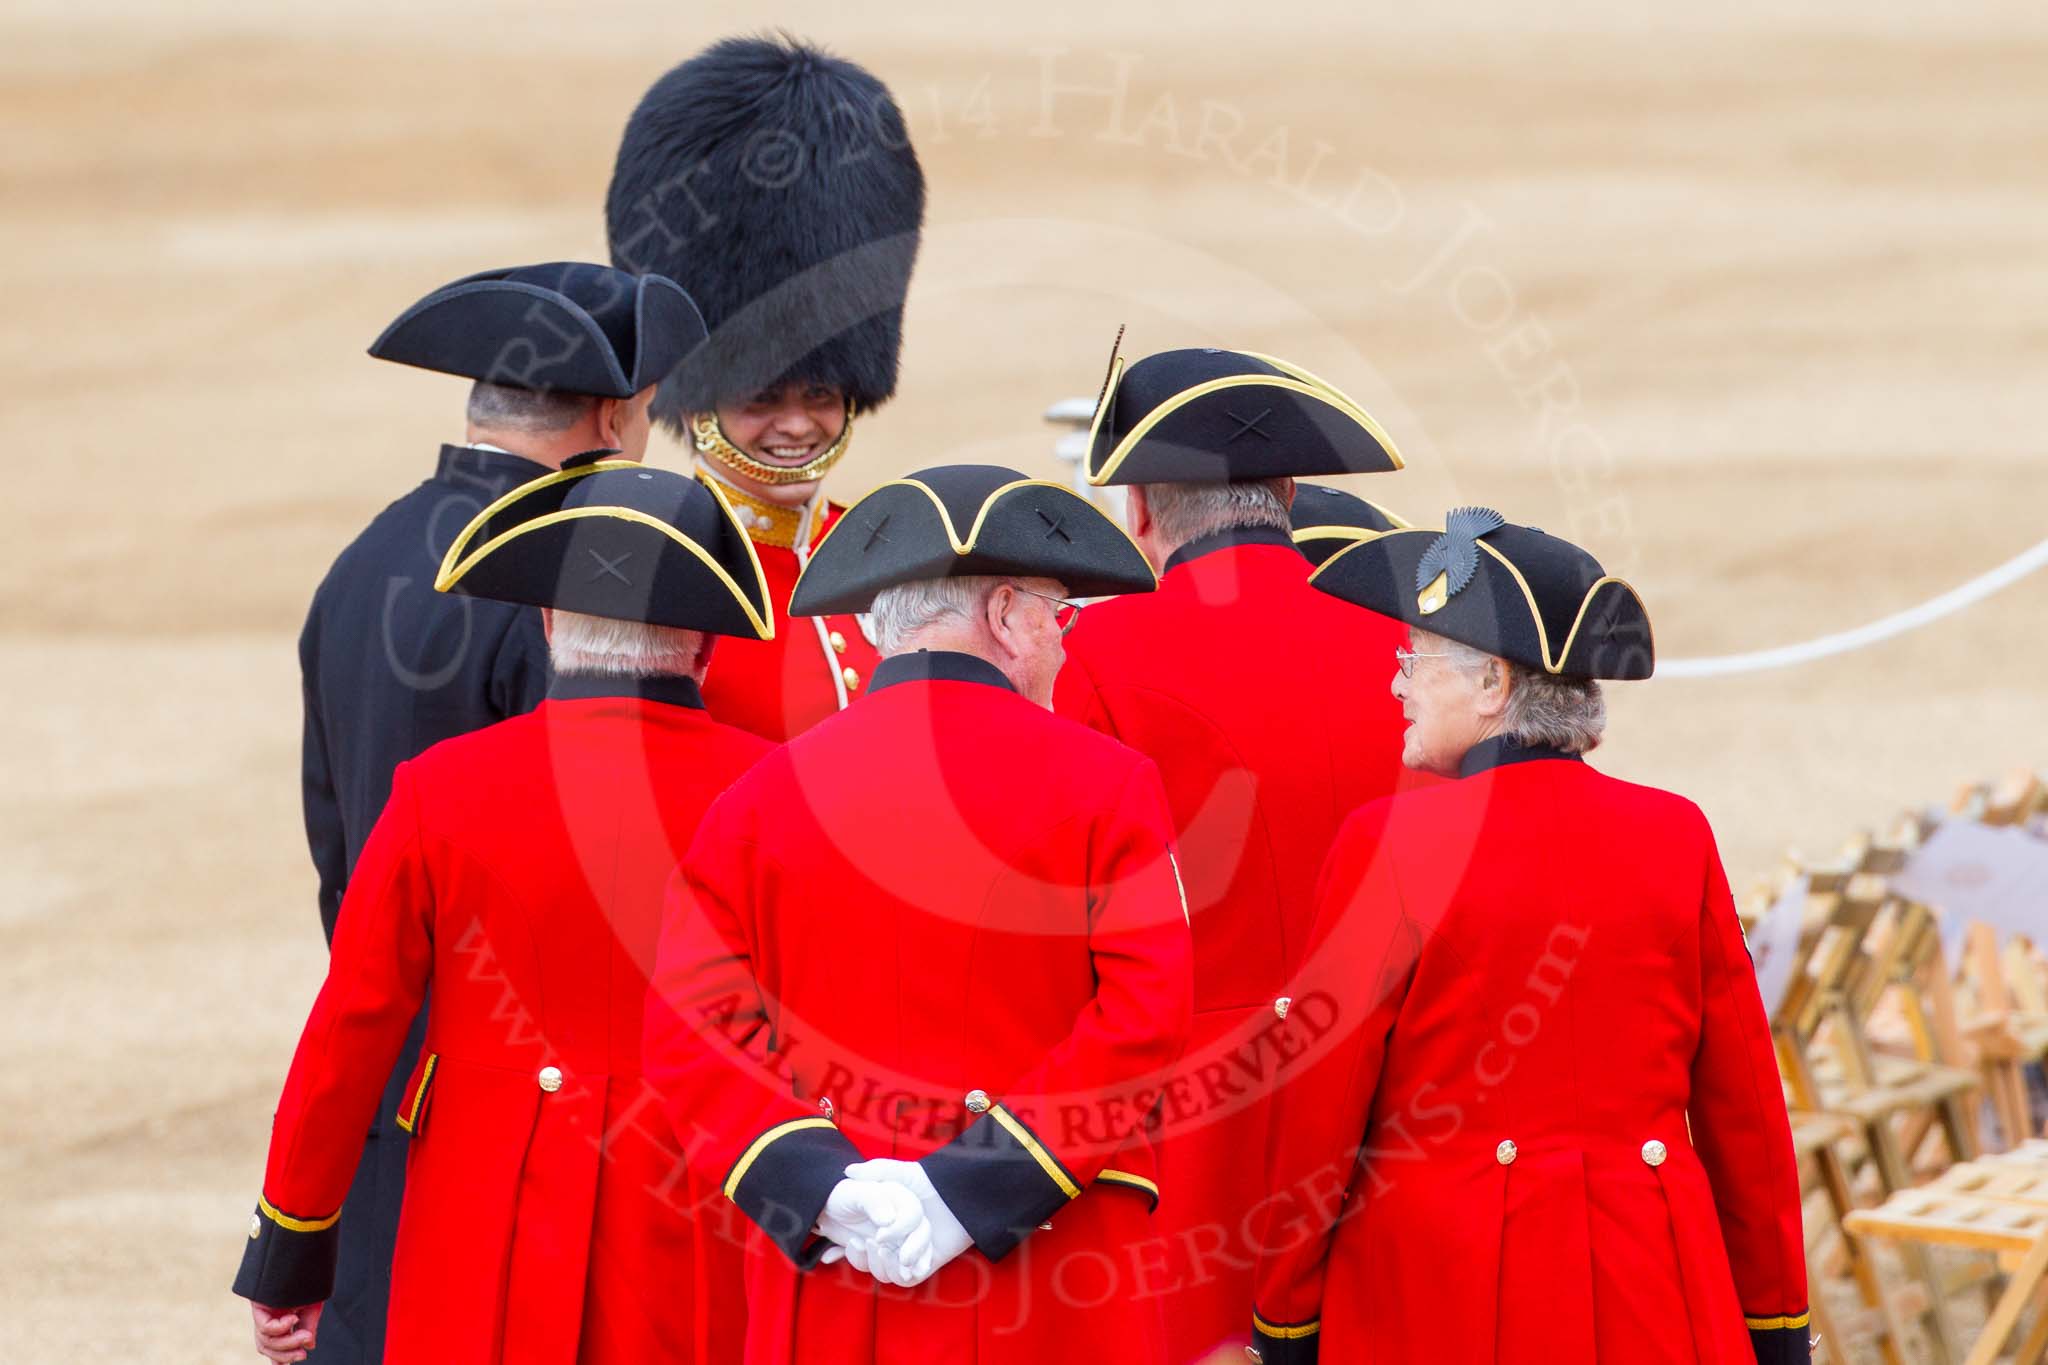 Trooping the Colour 2014.
Horse Guards Parade, Westminster,
London SW1A,

United Kingdom,
on 14 June 2014 at 09:53, image #58